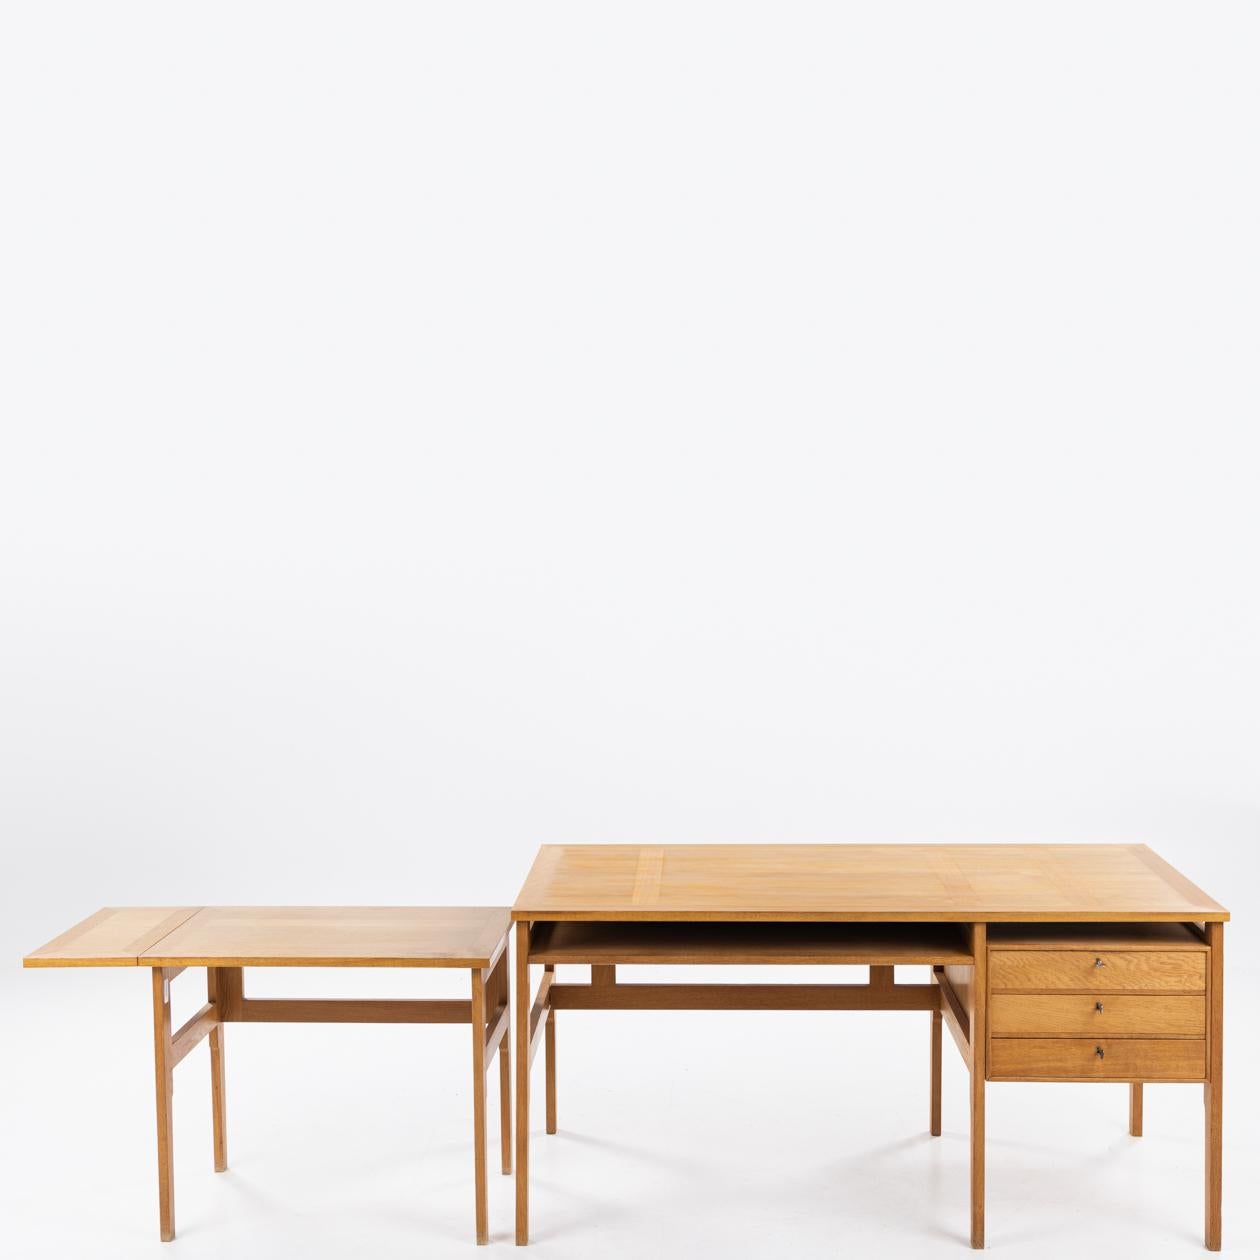 Desk in oak with a three-drawer drawer cassette and side table by Mogens Koch / Rud. Rasmussen.